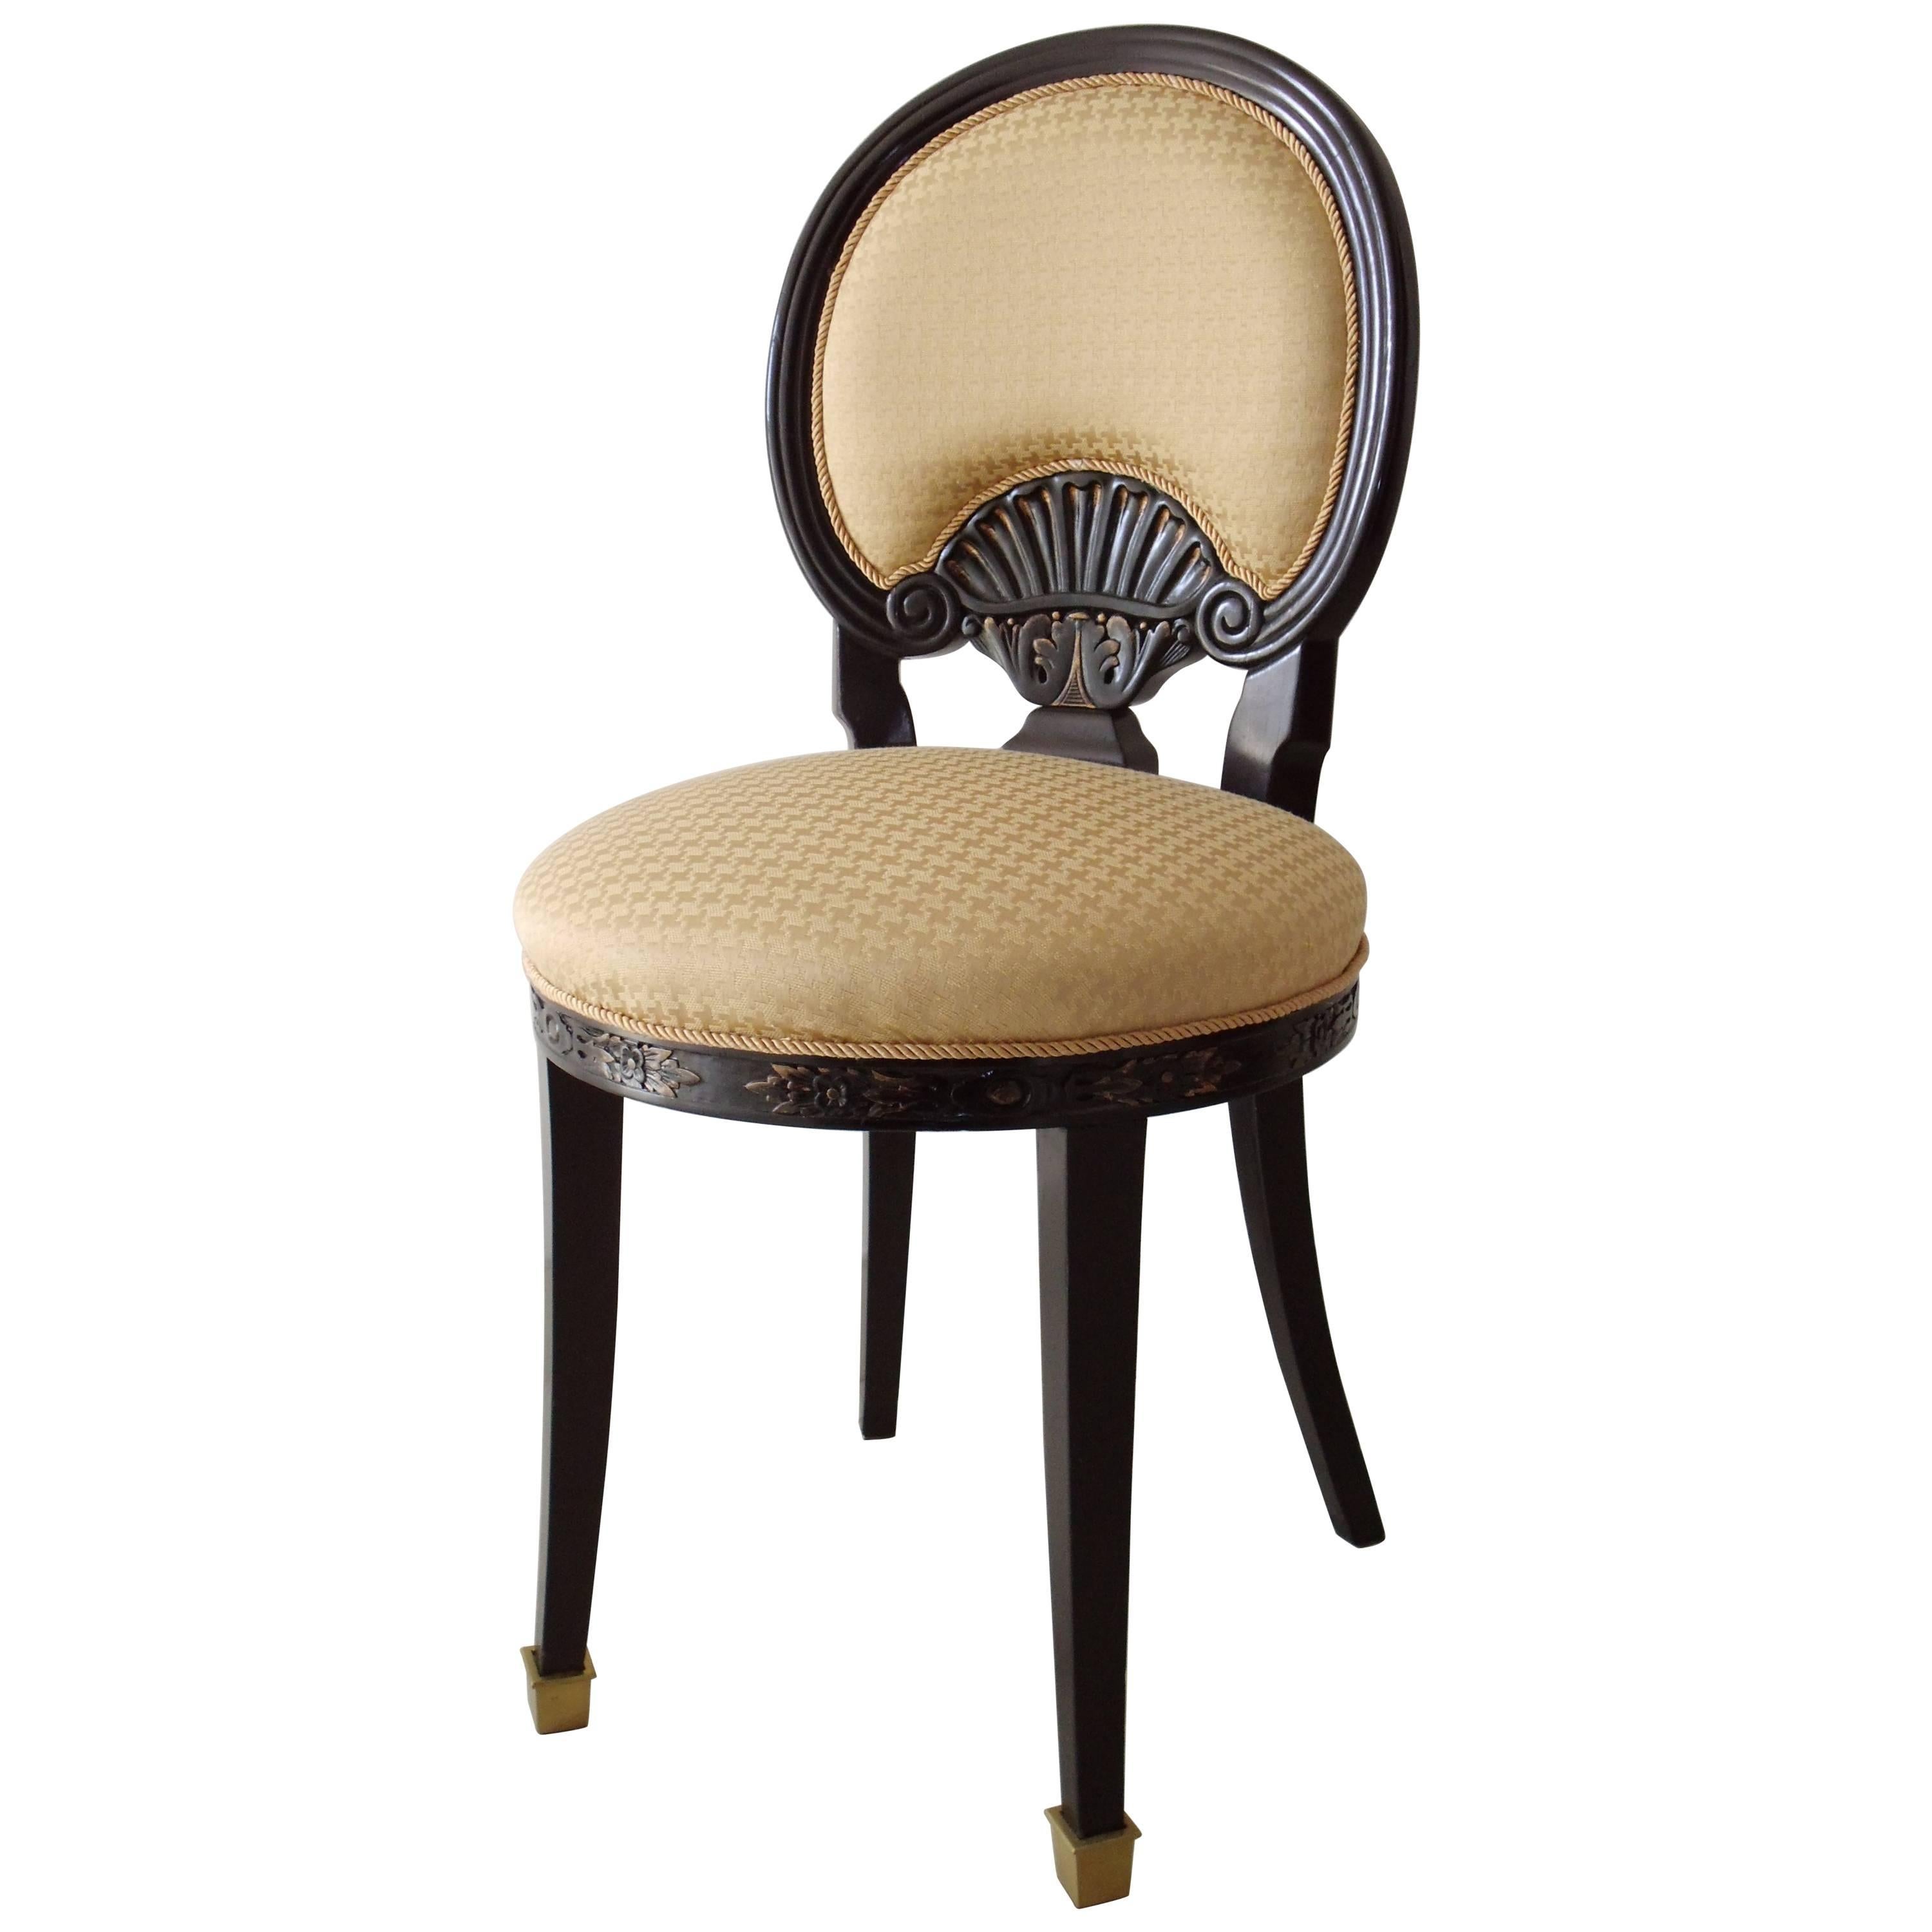 19th Century Single Chair in Black and Yellow For Sale